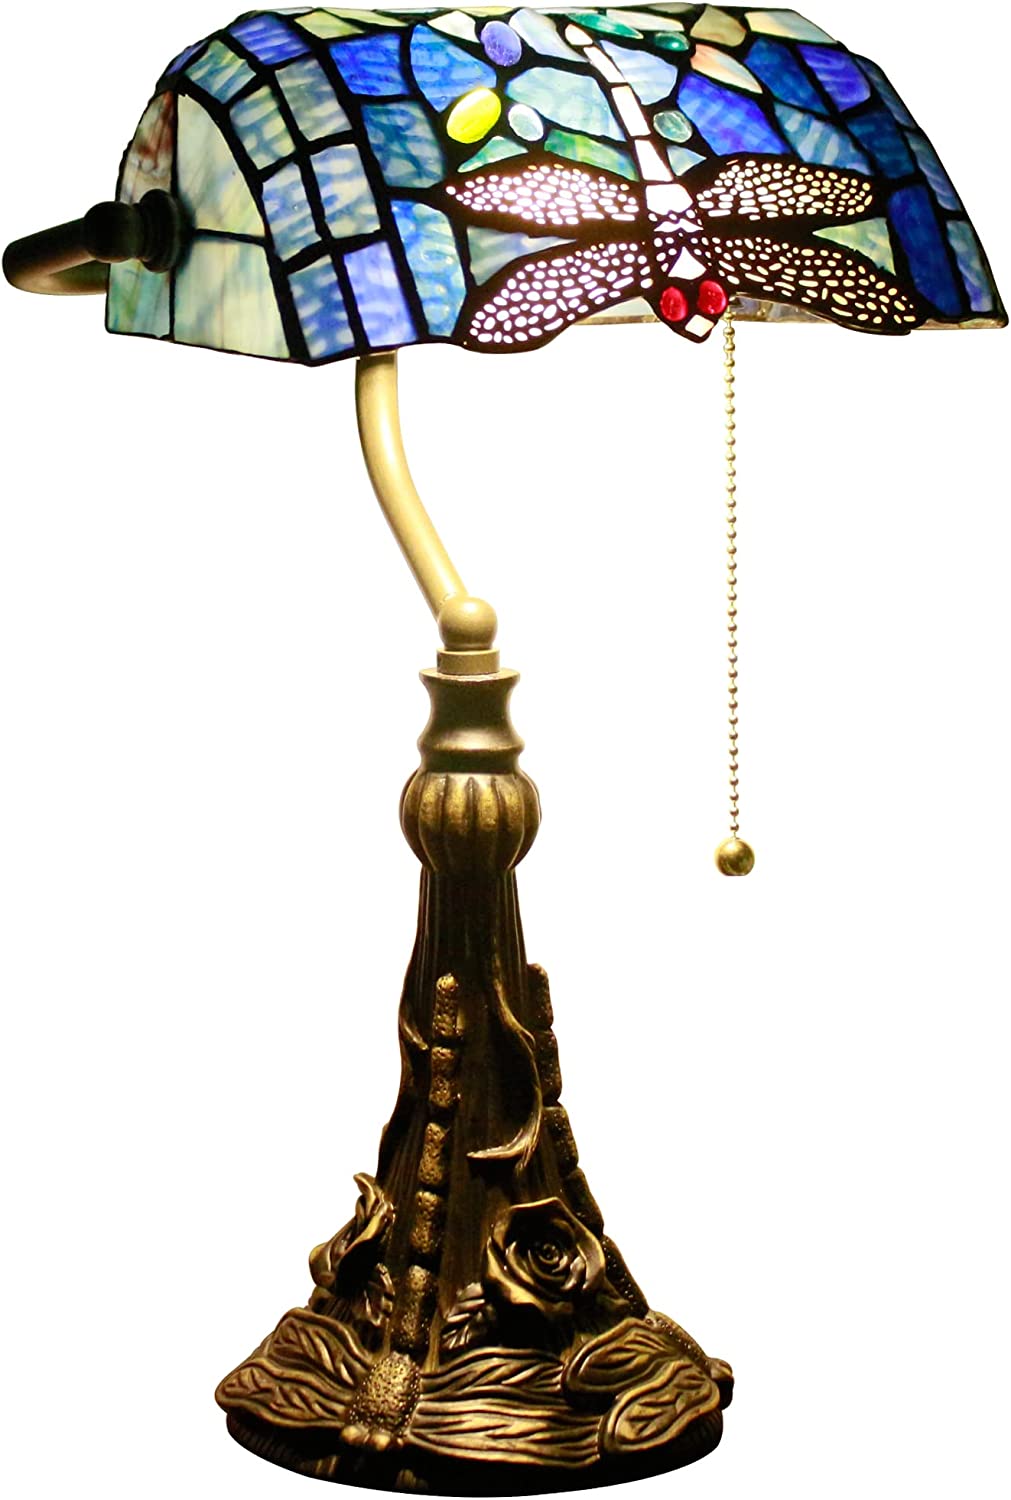 Werfactory® Banker Lamp Tiffany Desk Lamp Navy Blue Dragonfly Style Stained Glass Table Lamp 15" Tall